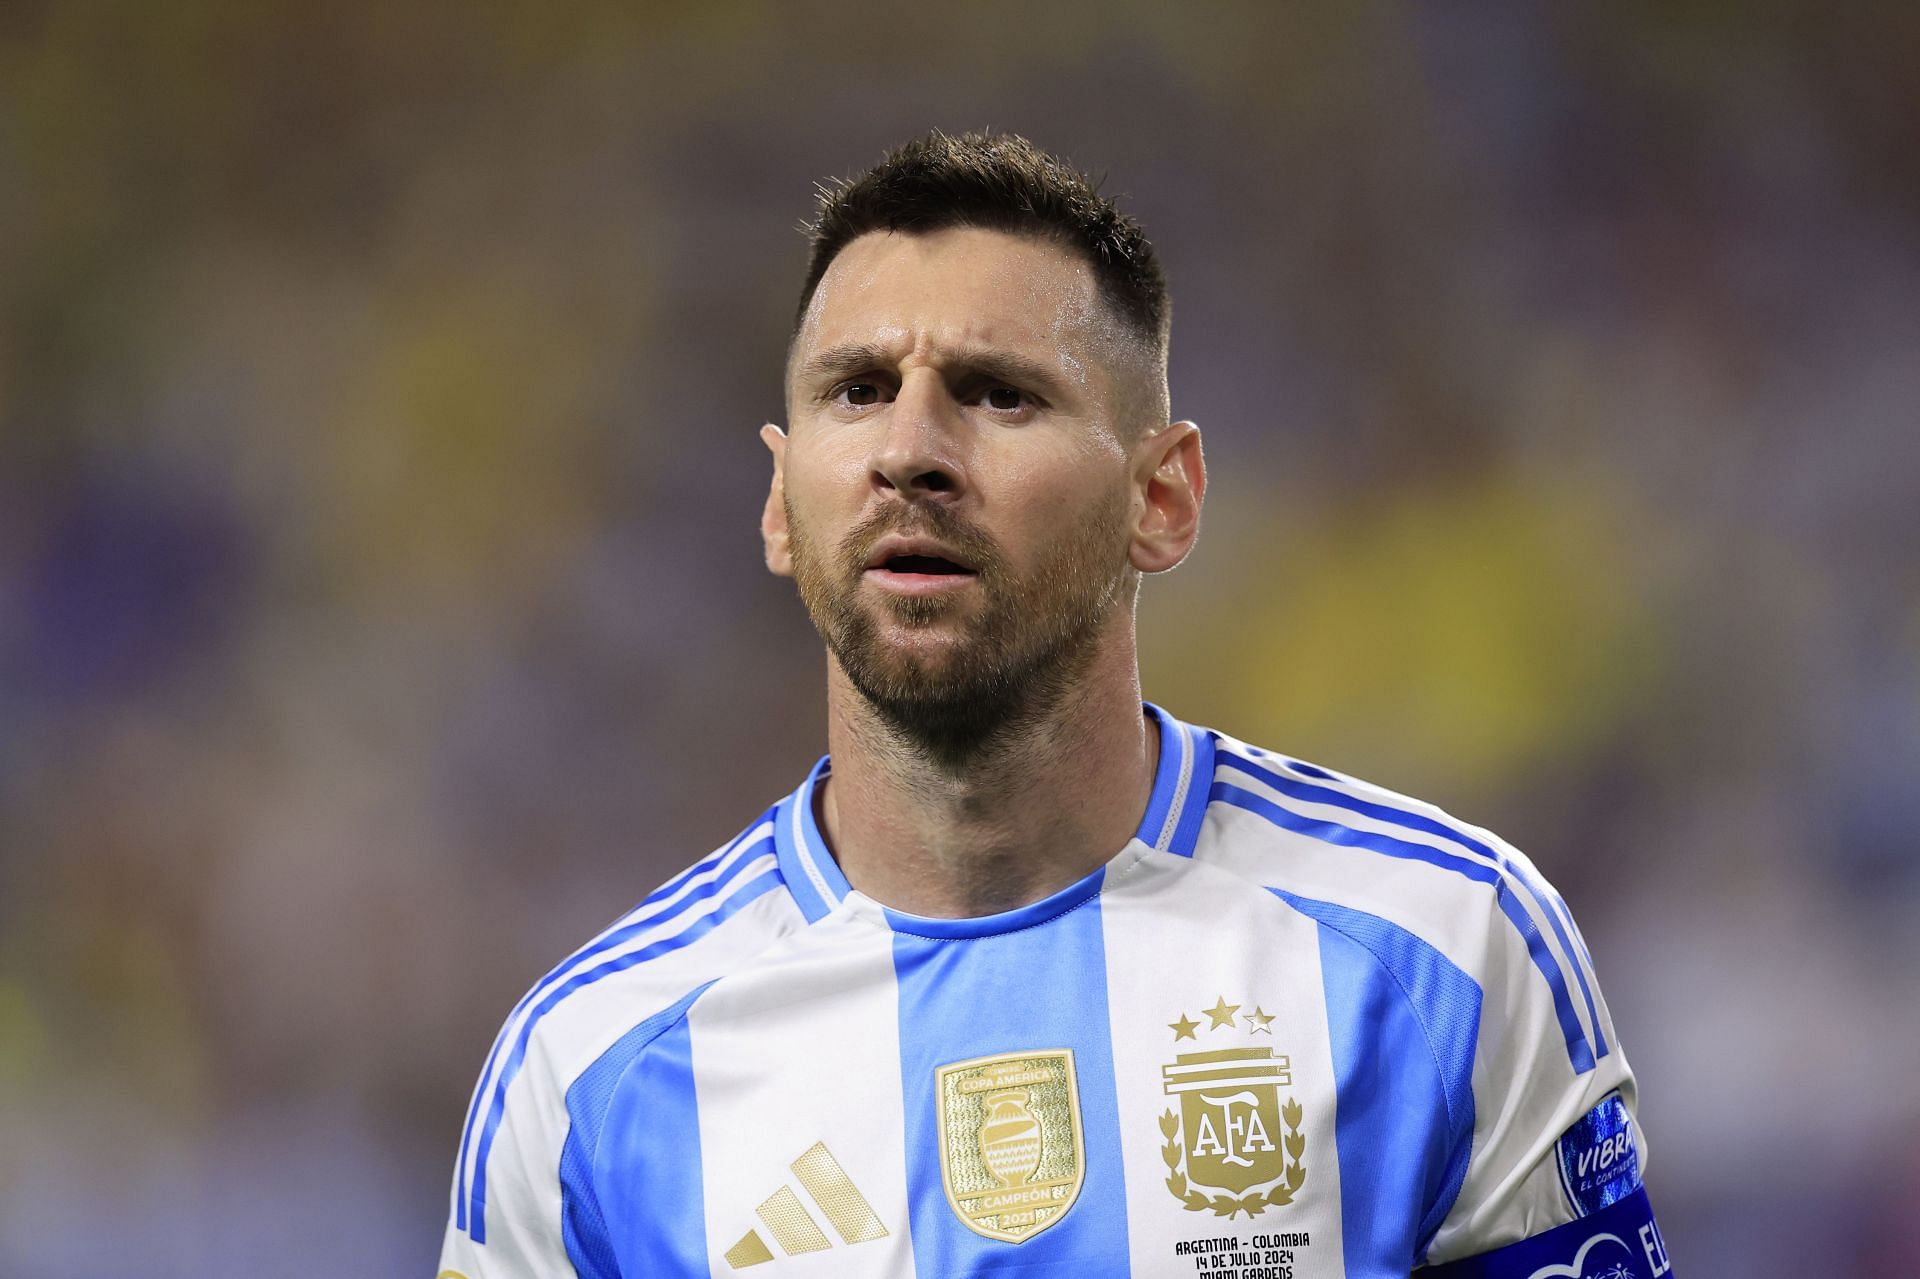 “Sometimes, he has the wrong arrogance” - Ex-Liverpool coach brands Lionel Messi a ‘diving c**t’ but picks him over Cristiano Ronaldo